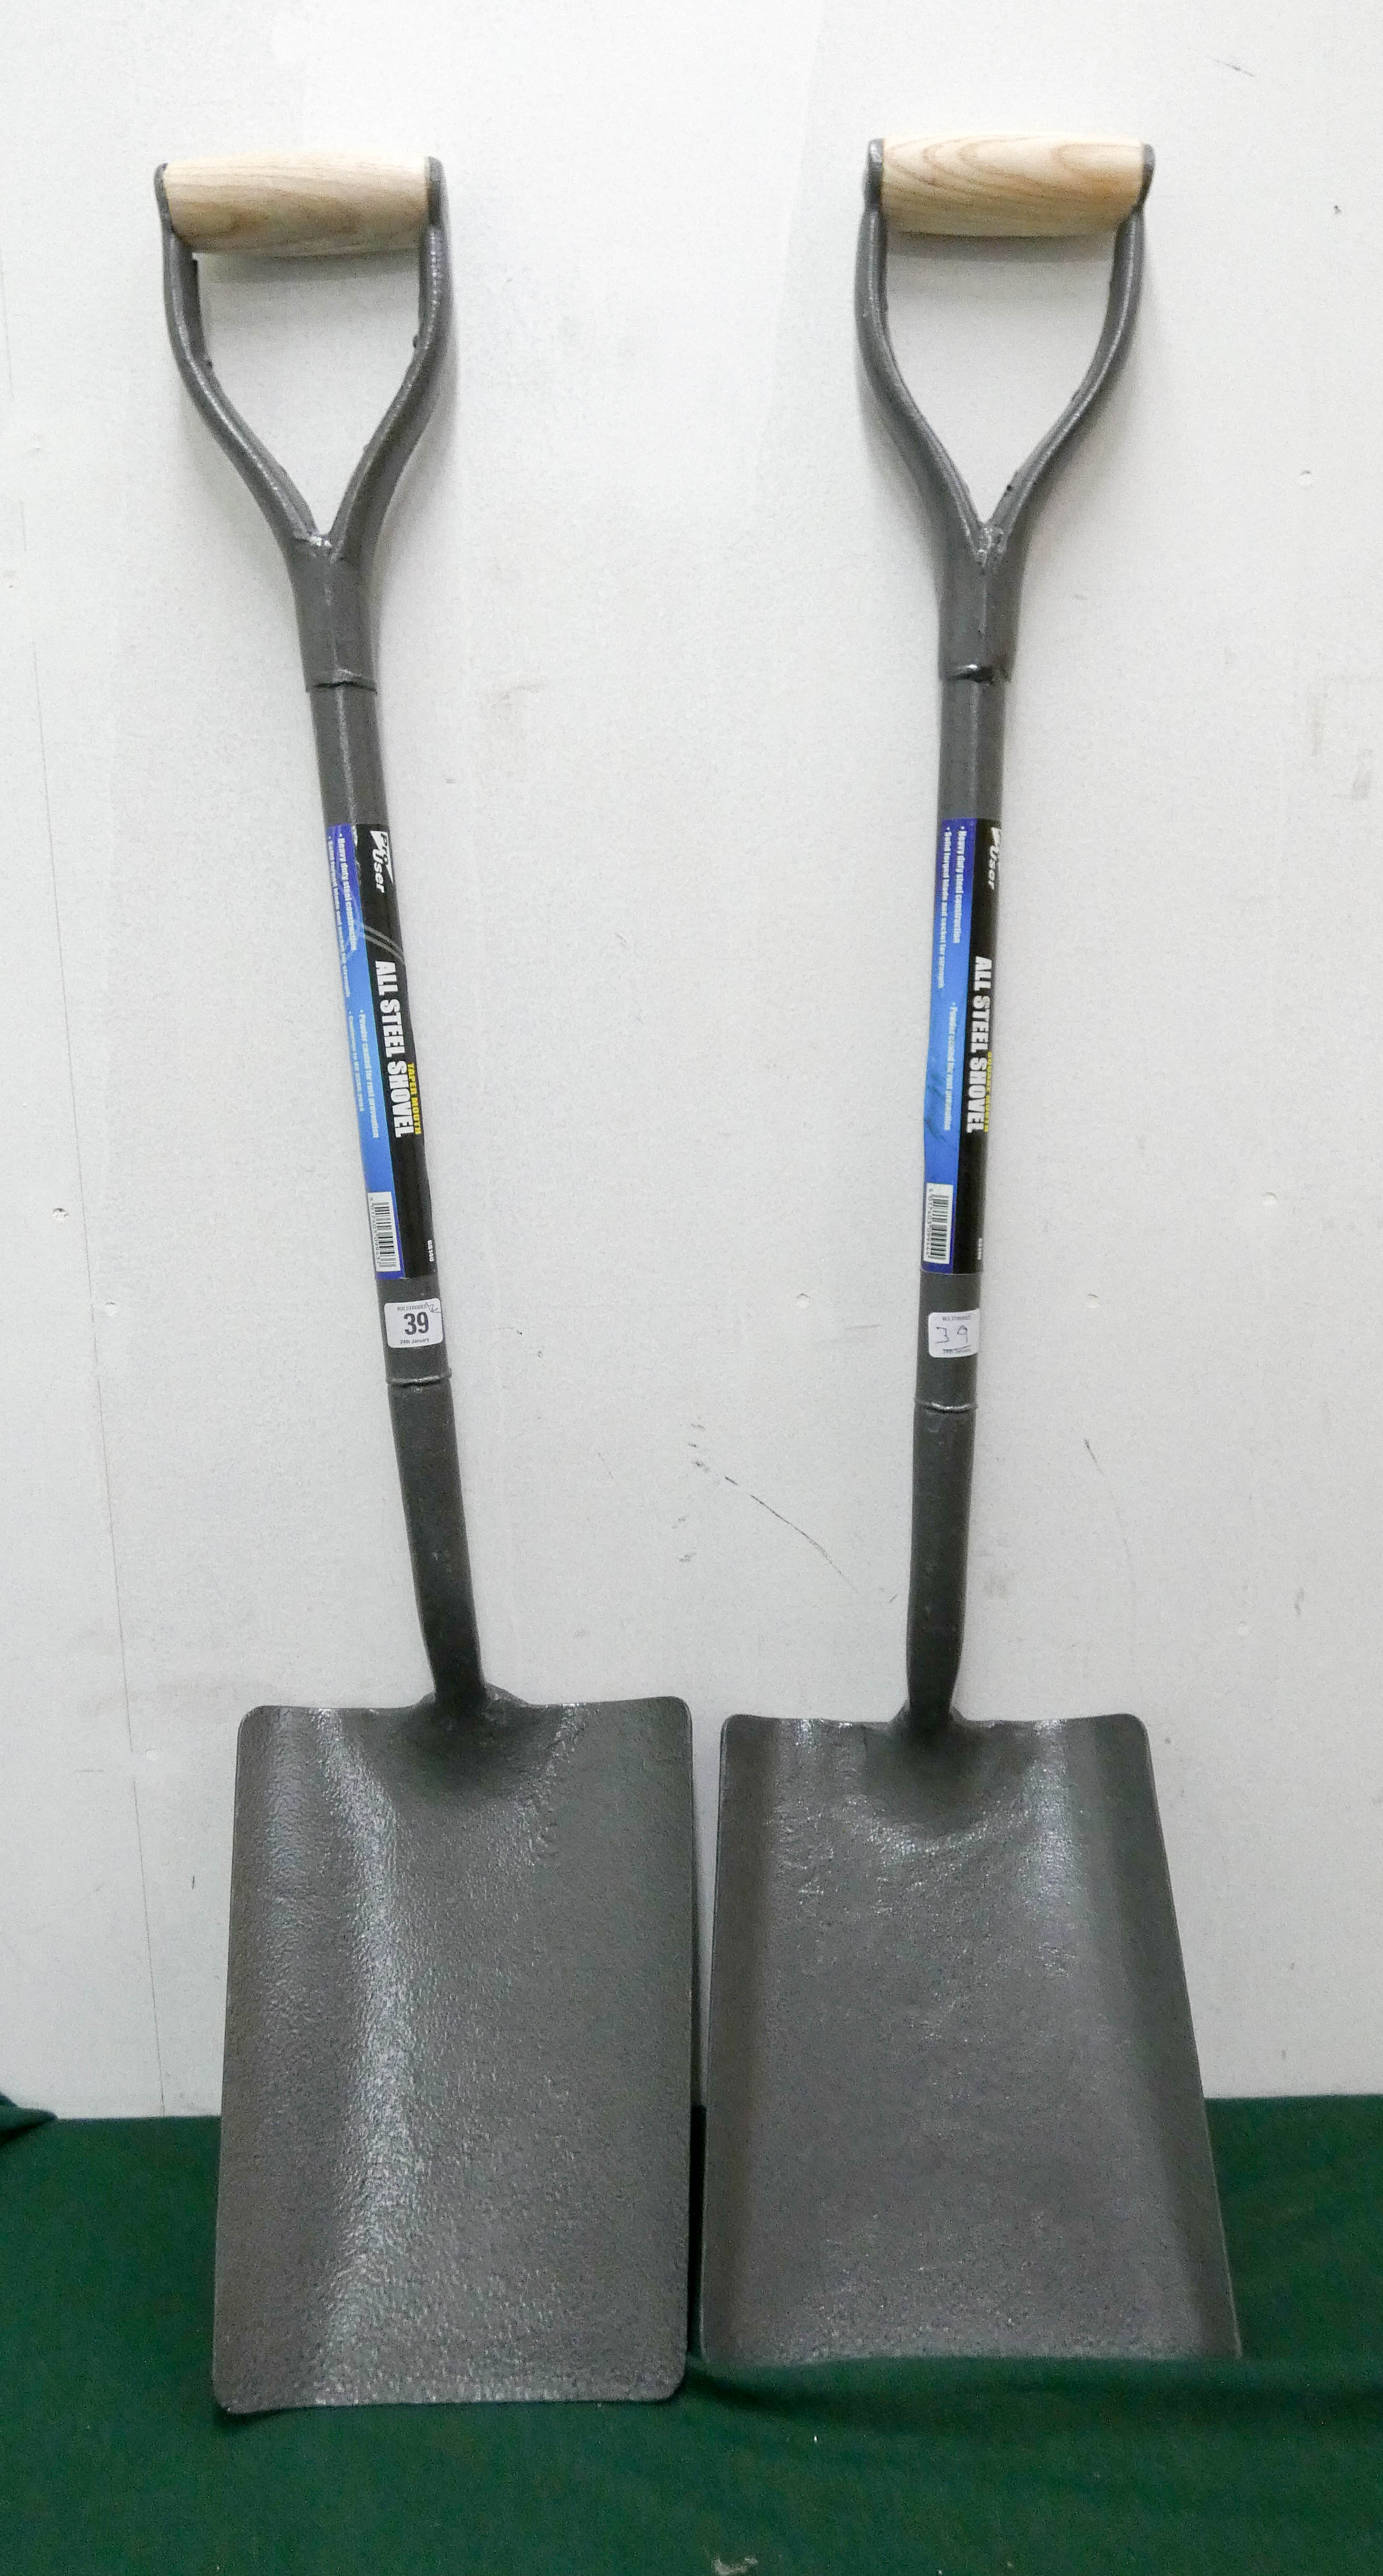 A new all steel tapered mouth shovel and a new all steel square mouth shovel